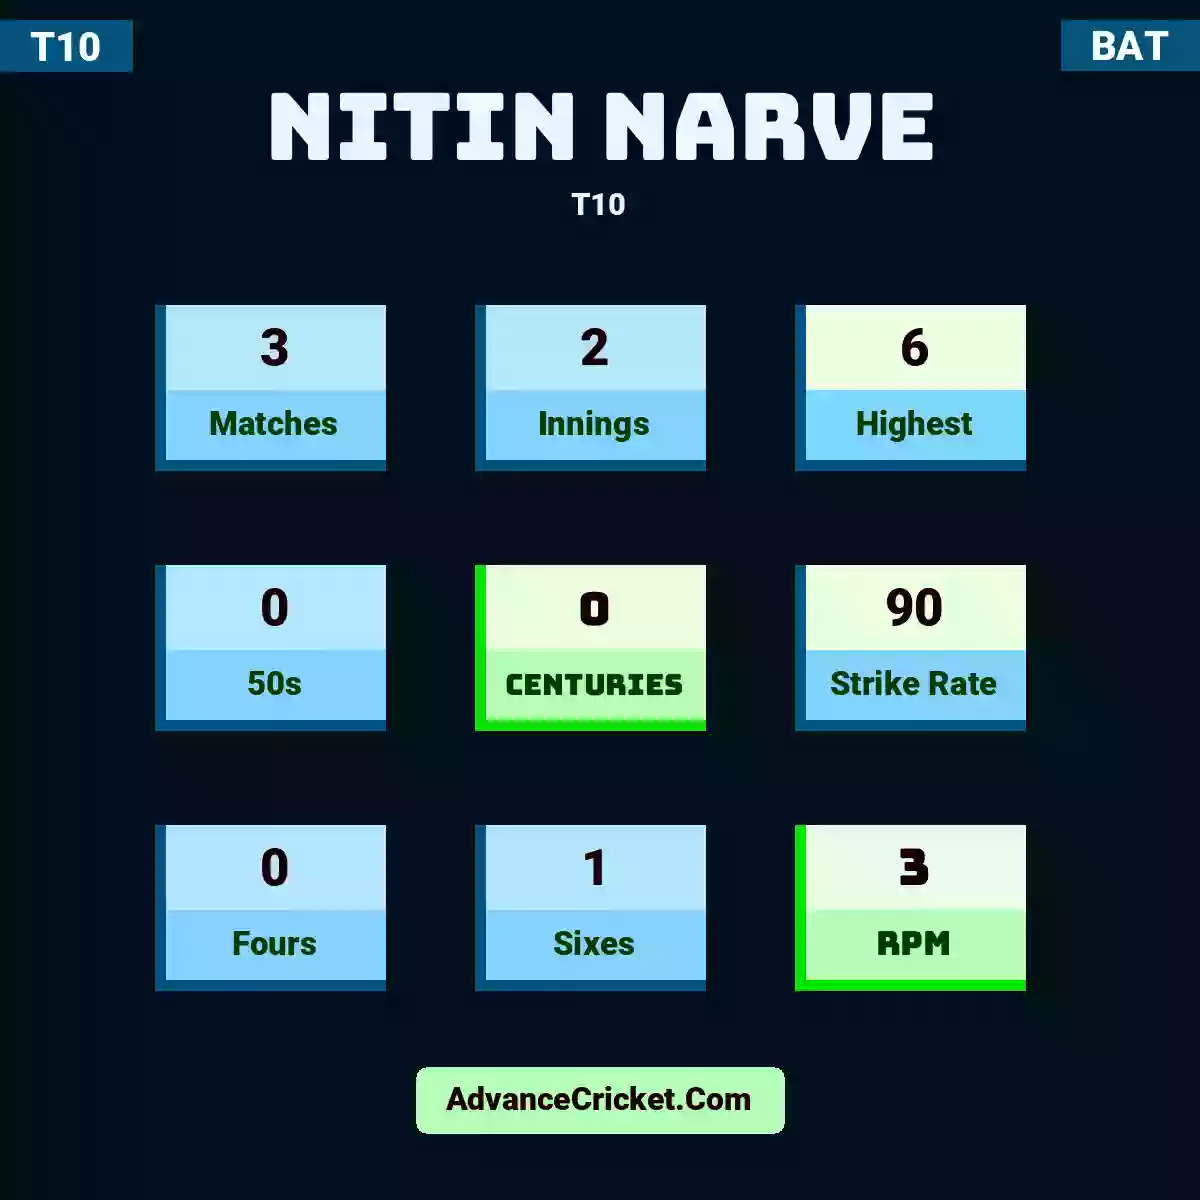 Nitin Narve T10 , Nitin Narve played 3 matches, scored 6 runs as highest, 0 half-centuries, and 0 centuries, with a strike rate of 90. N.Narve hit 0 fours and 1 sixes, with an RPM of 3.